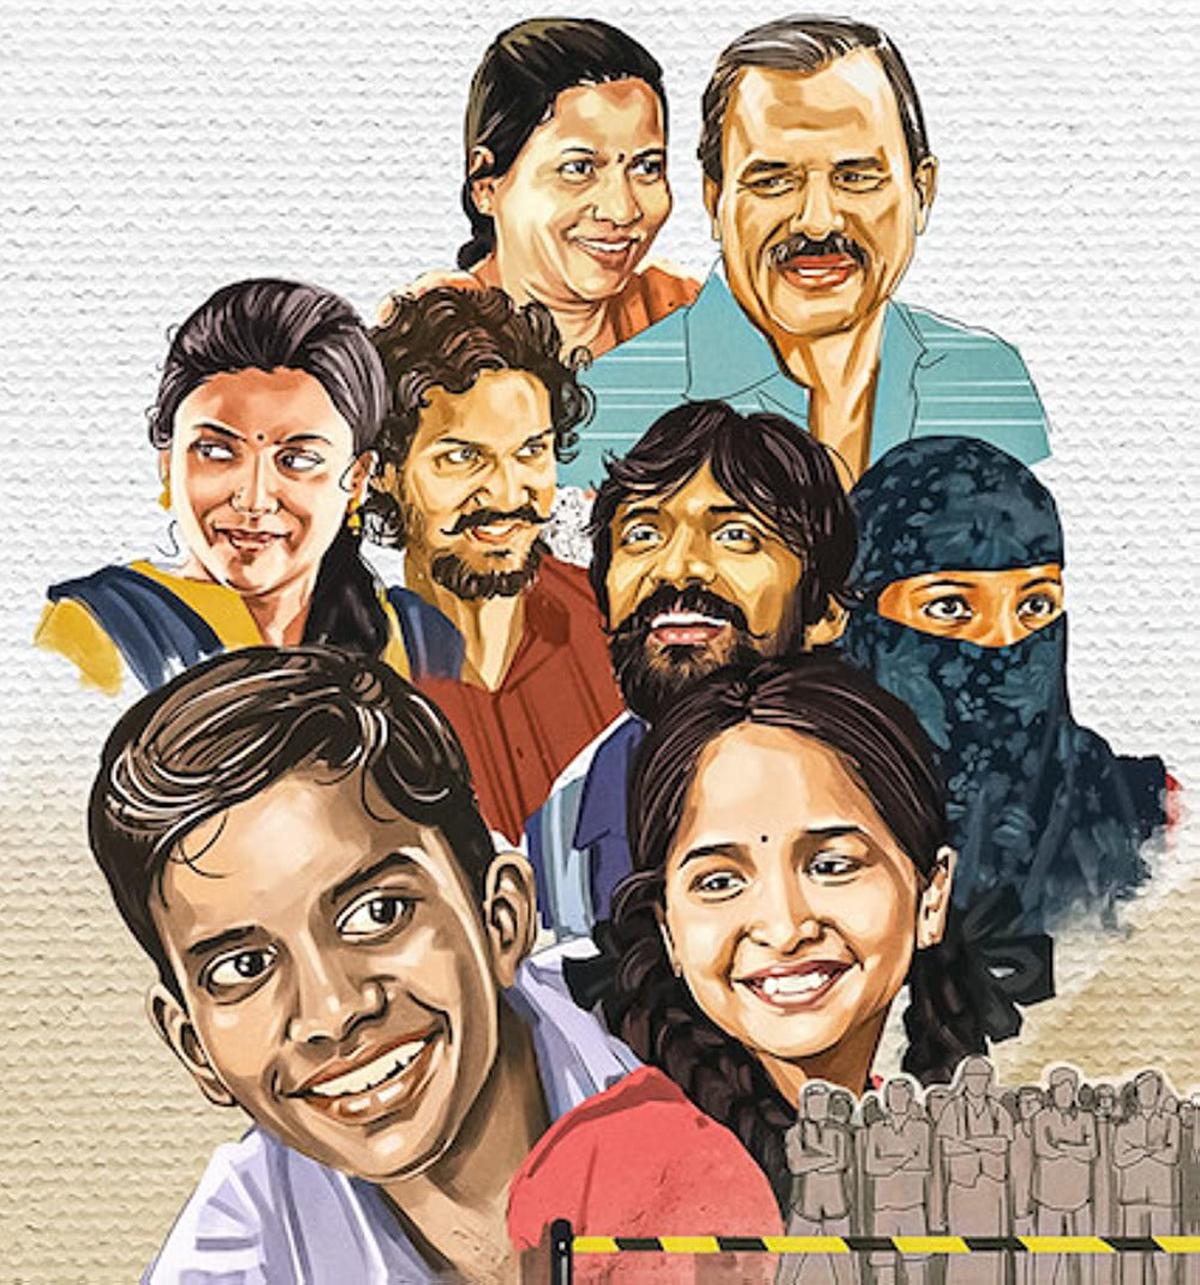 ‘Care of Kancharapalem’ starred nearly 80 non-actors from Kancharapalem 